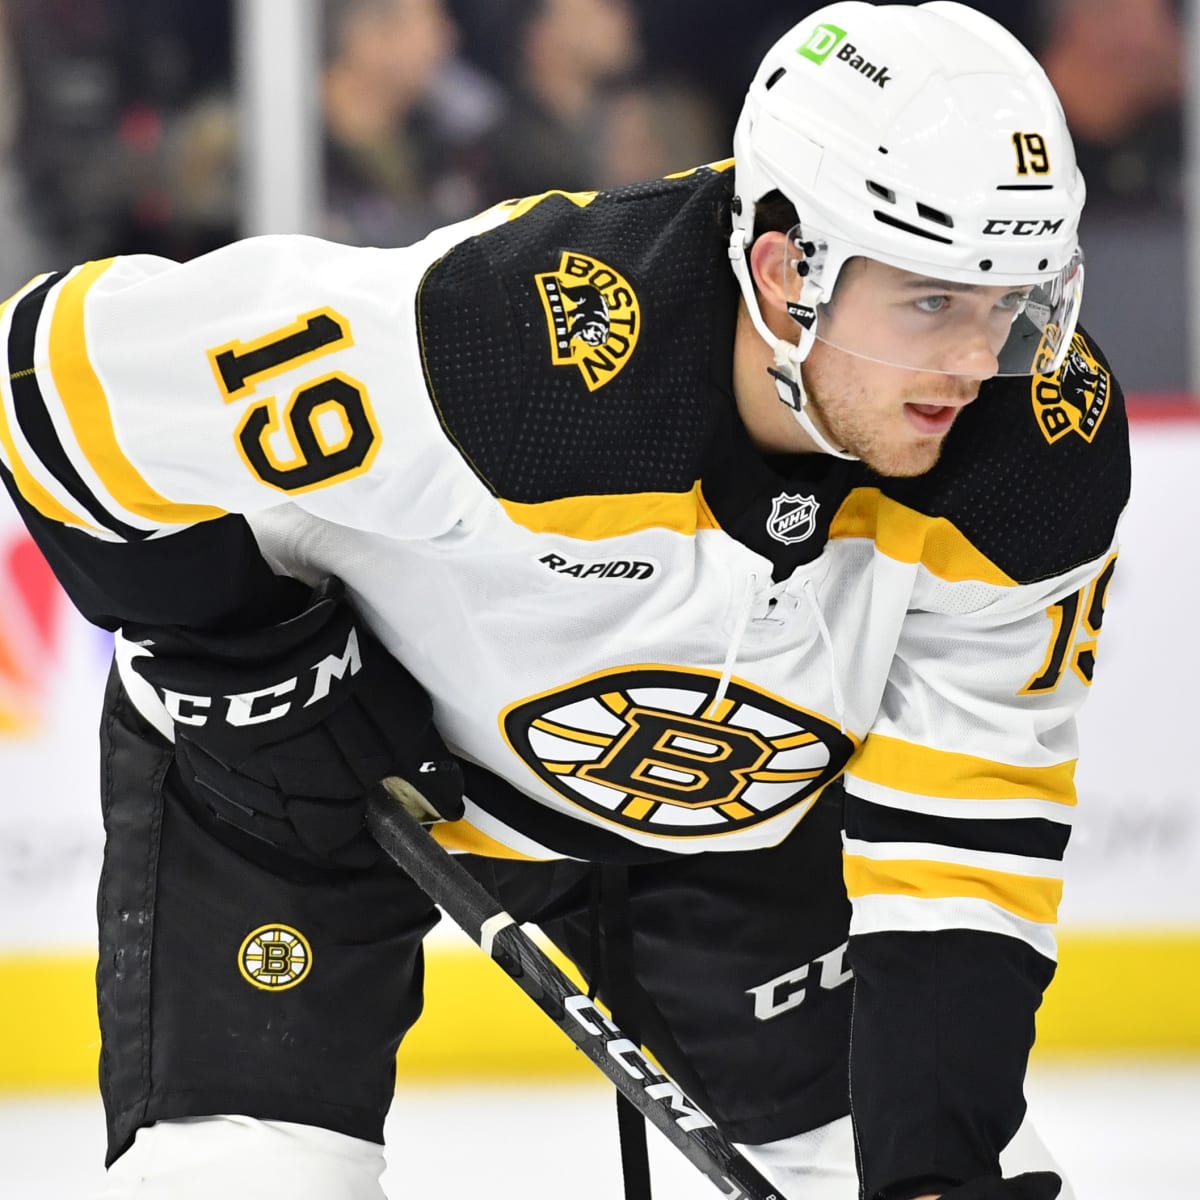 Bussi a reliable rookie in Bruins' net